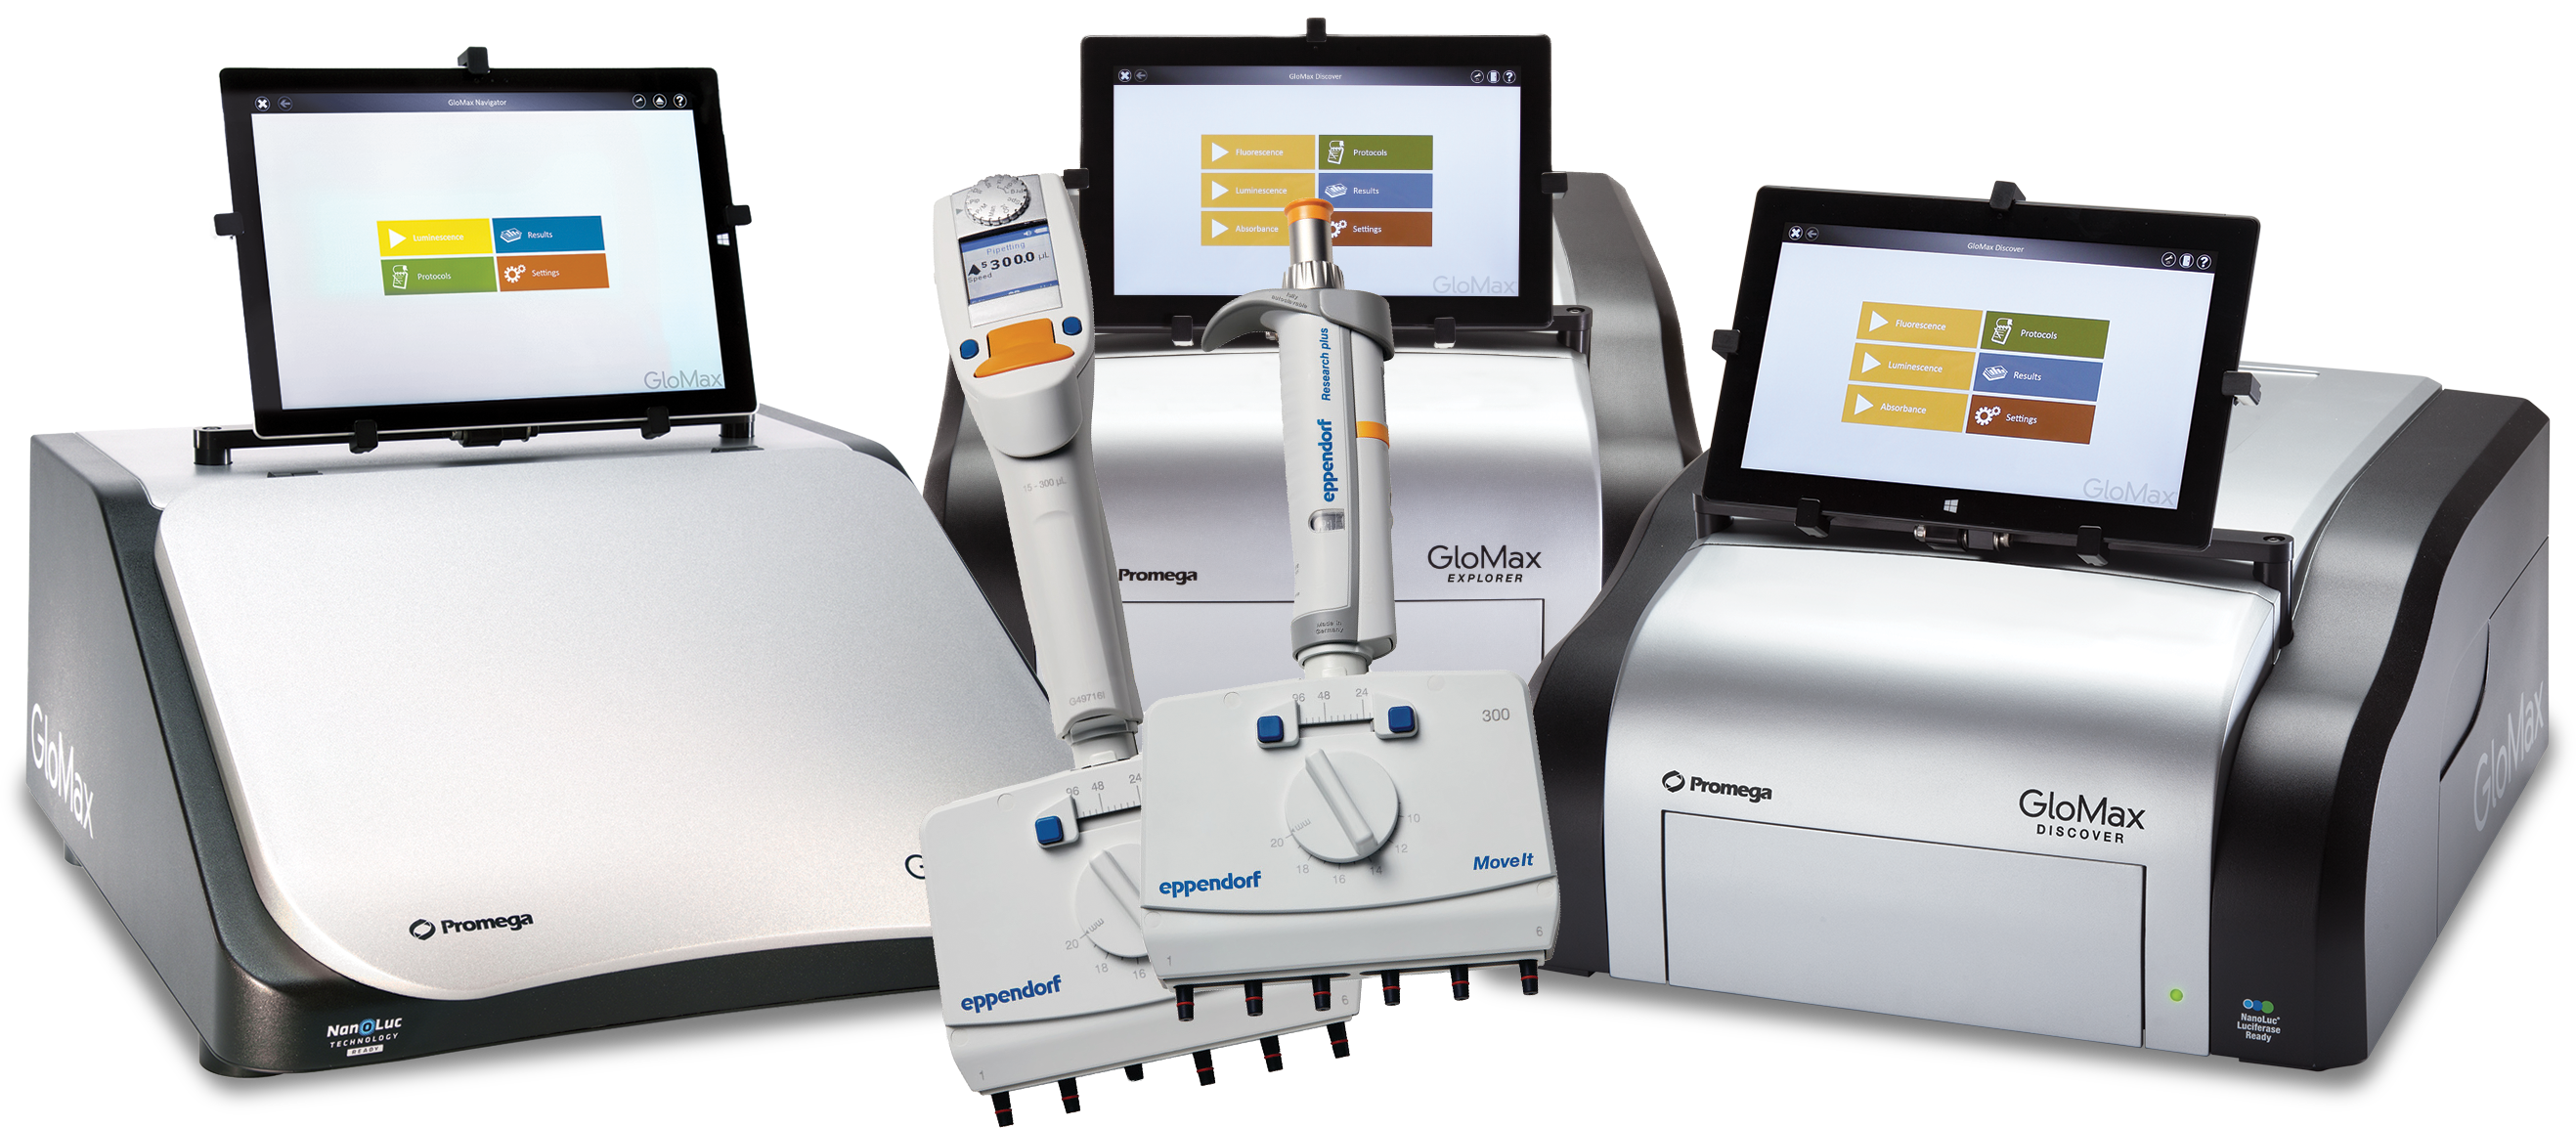 GloMax Instruments with Eppendorf Move It Pipette